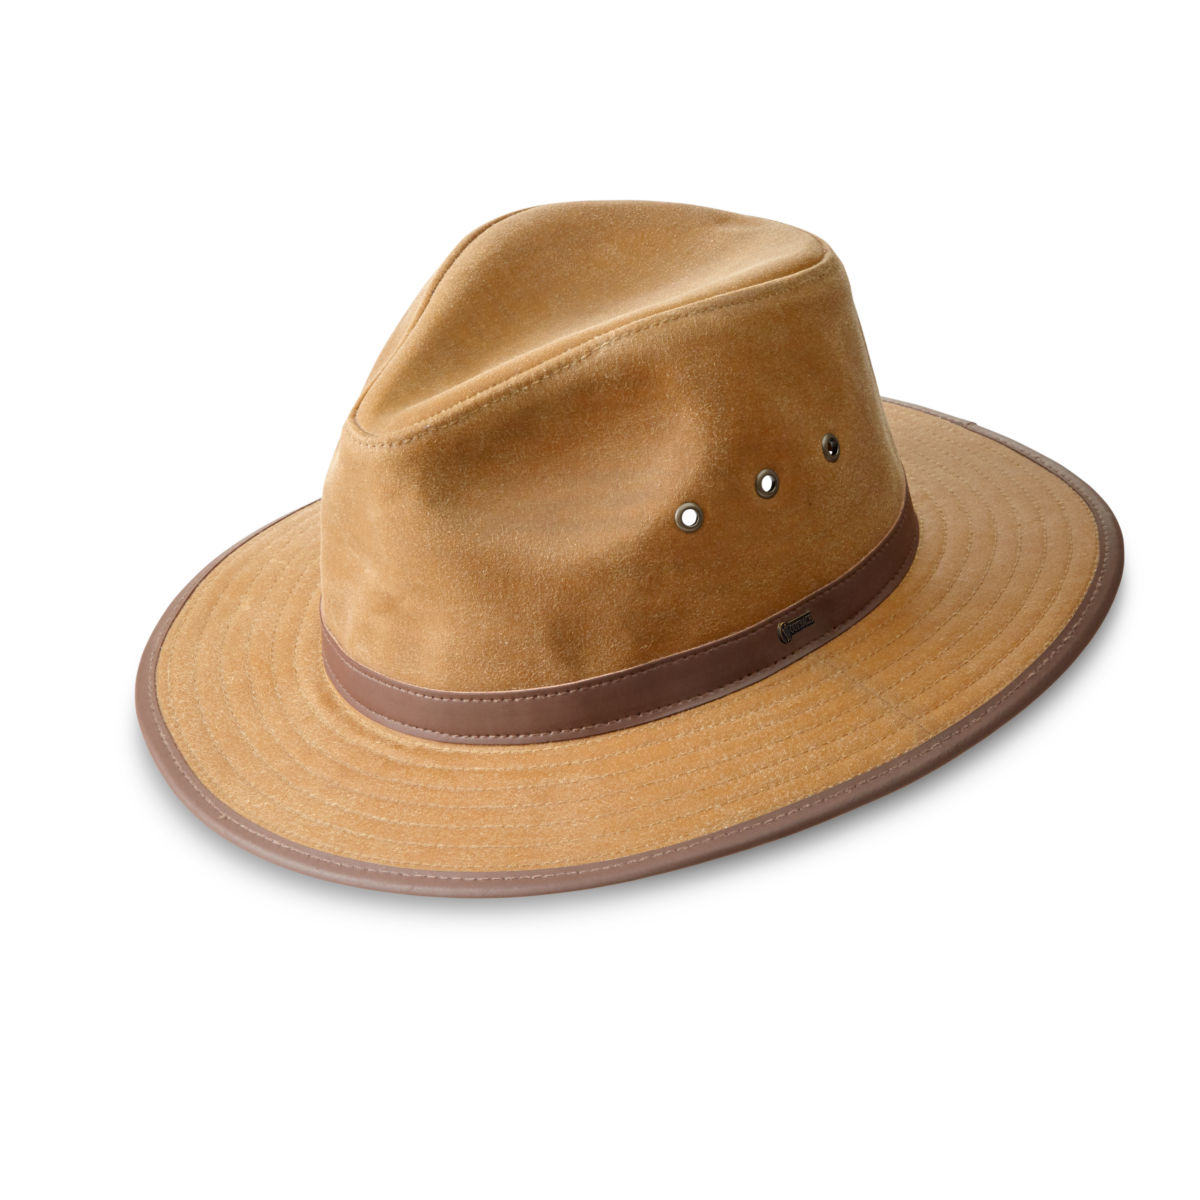 Orvis Oilcloth Outback-Style Hat | Orvis